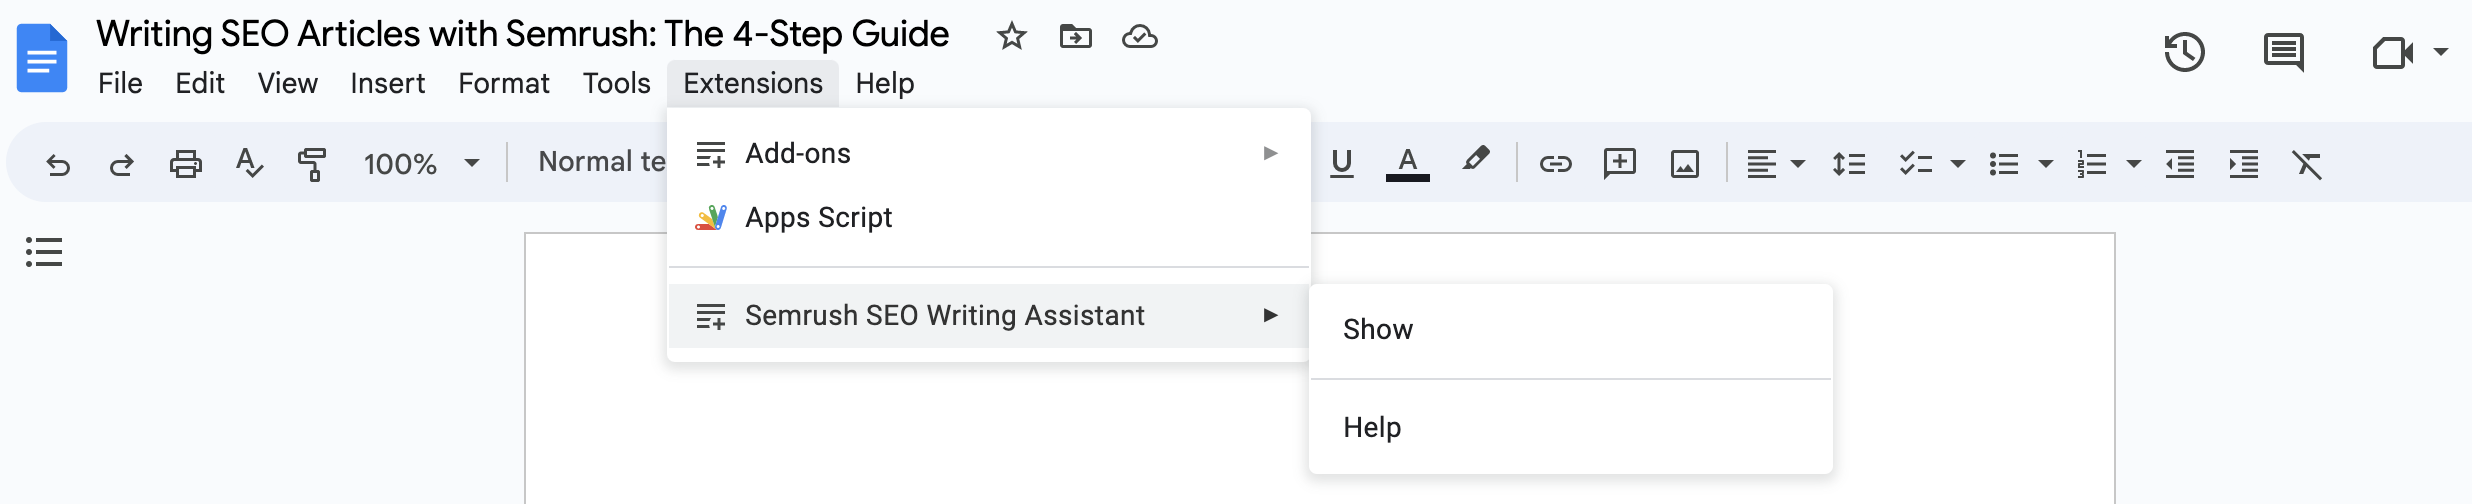 Semrush SEO Writing Assistant is shown in the extensions menu in Google Docs.